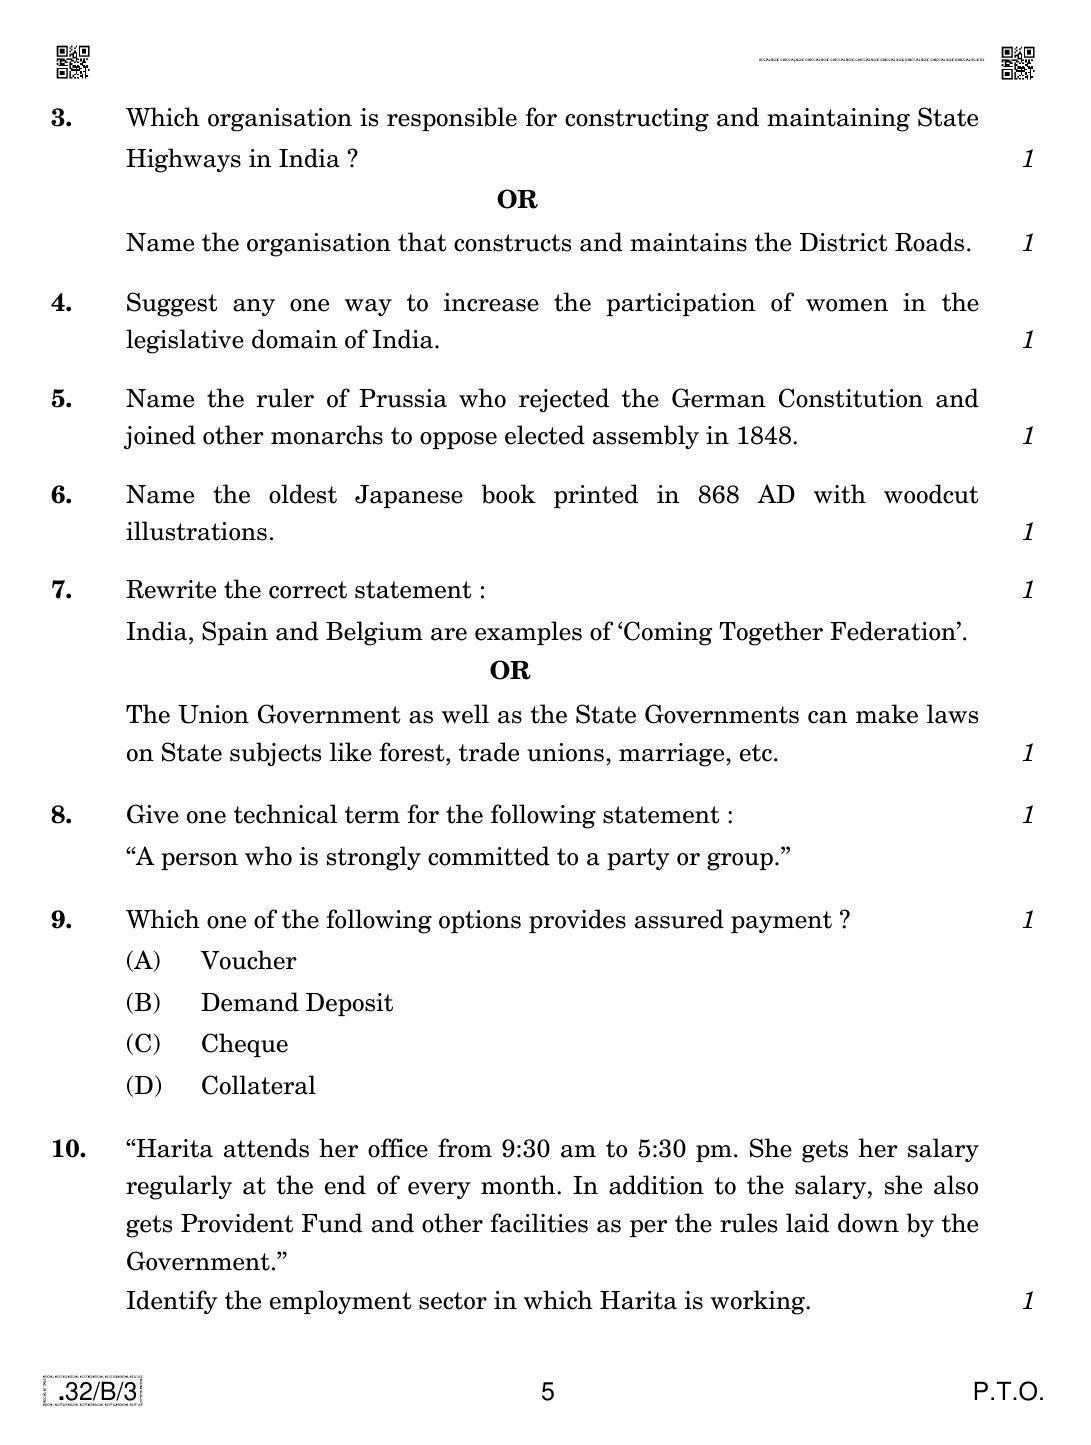 CBSE Class 10 32-C-3 Social Science 2020 Compartment Question Paper - Page 5